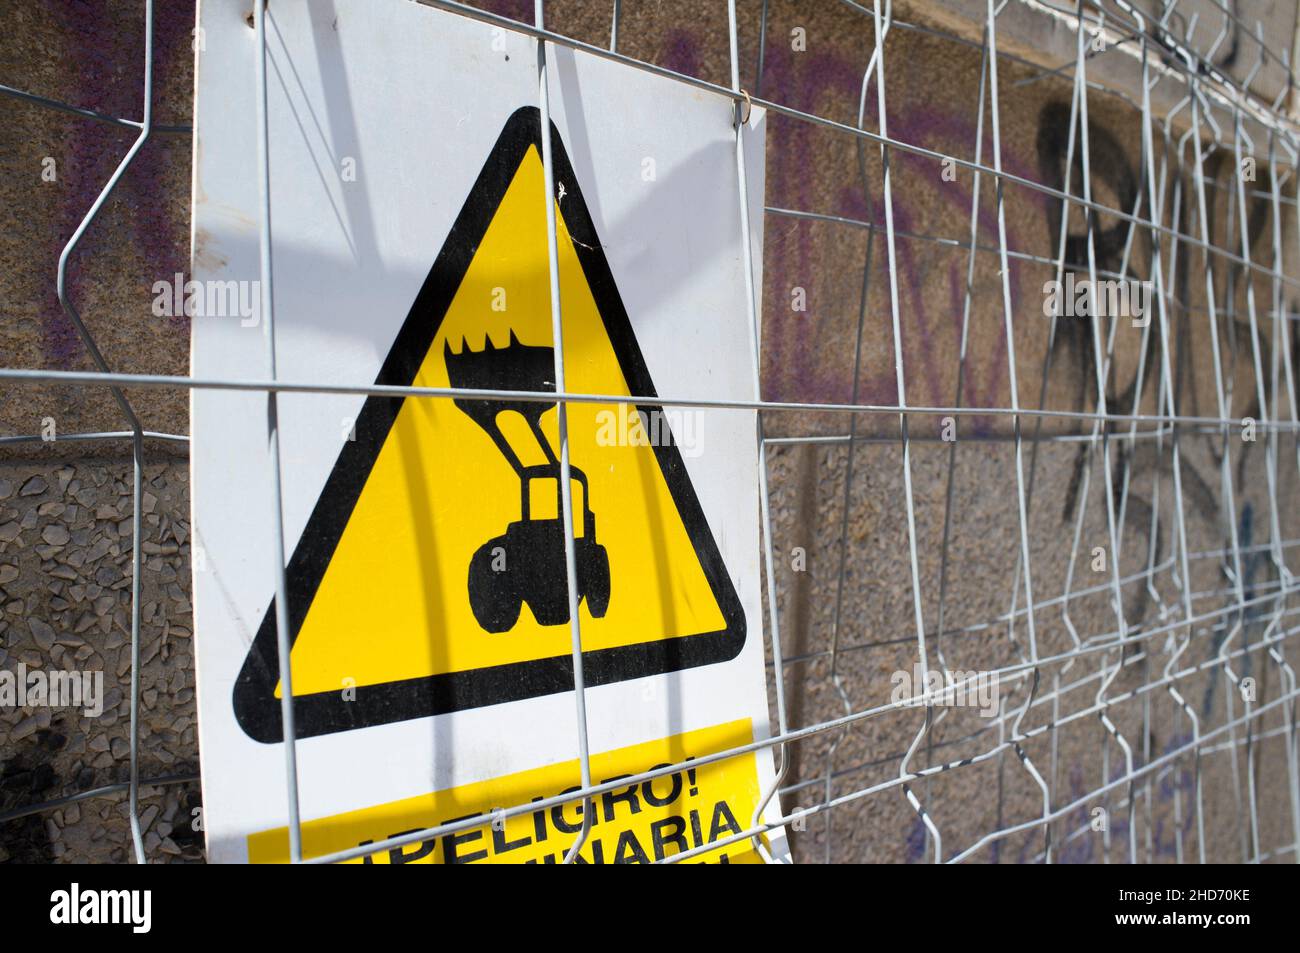 Heavy machinery at work warning sign. Tractor front loader draw visible throught the fence. Stock Photo